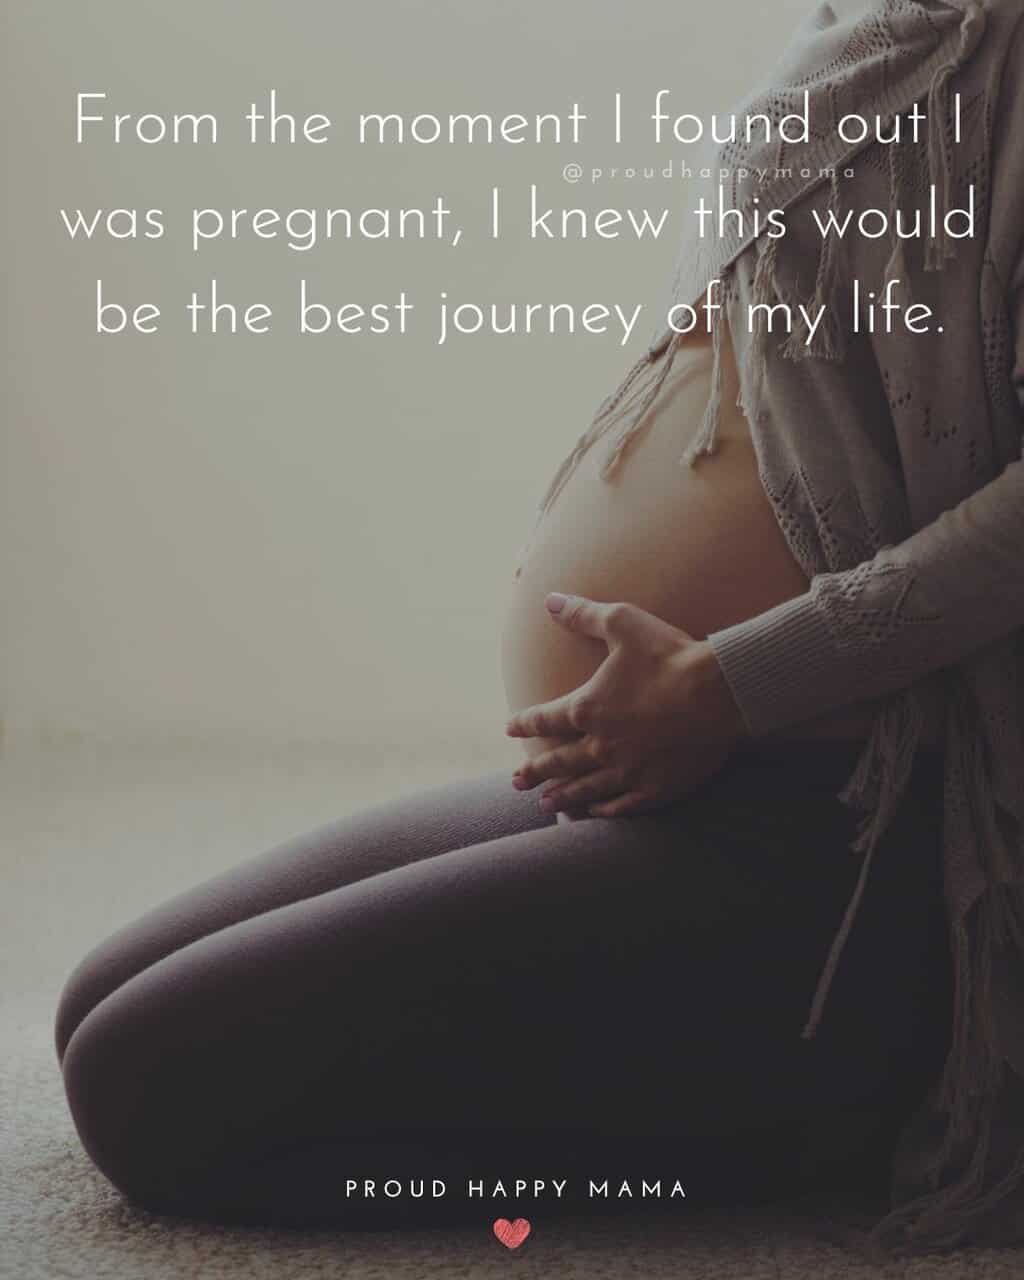 Short Pregnancy Quotes | From the moment I found out I was pregnant, I knew this would be the best journey of my life.